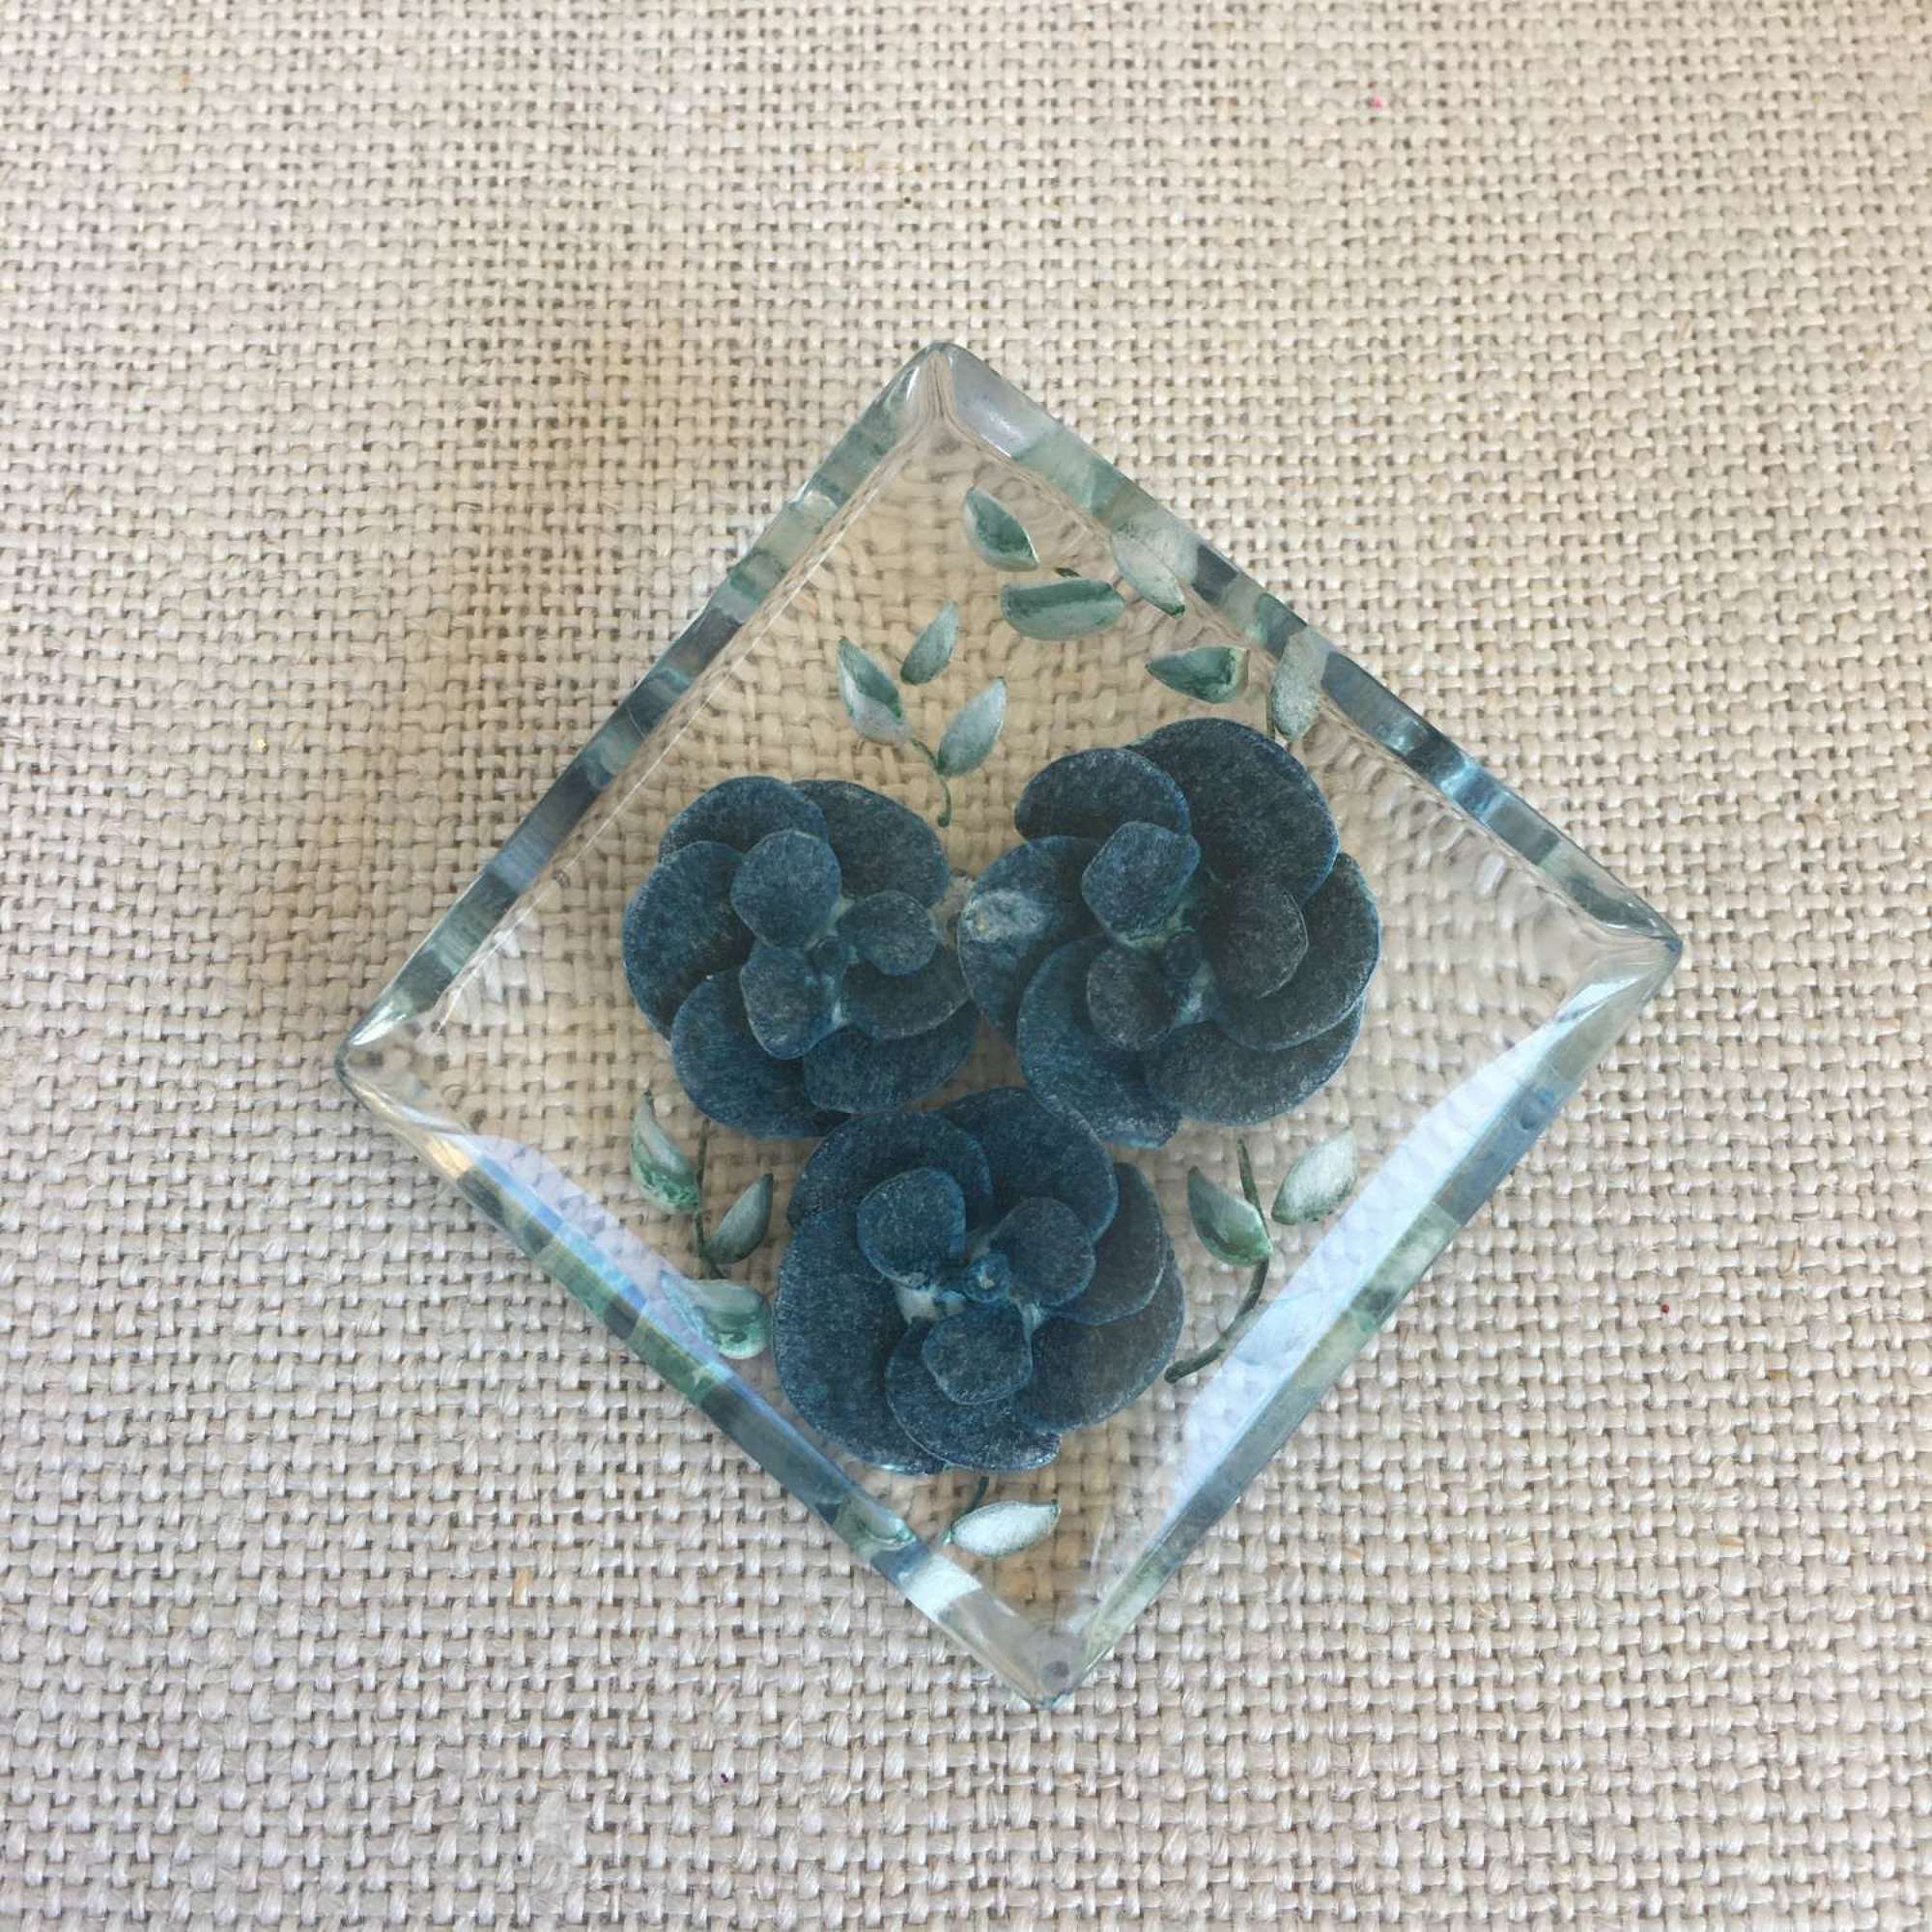 Vintage lucite brooch with blue flowers